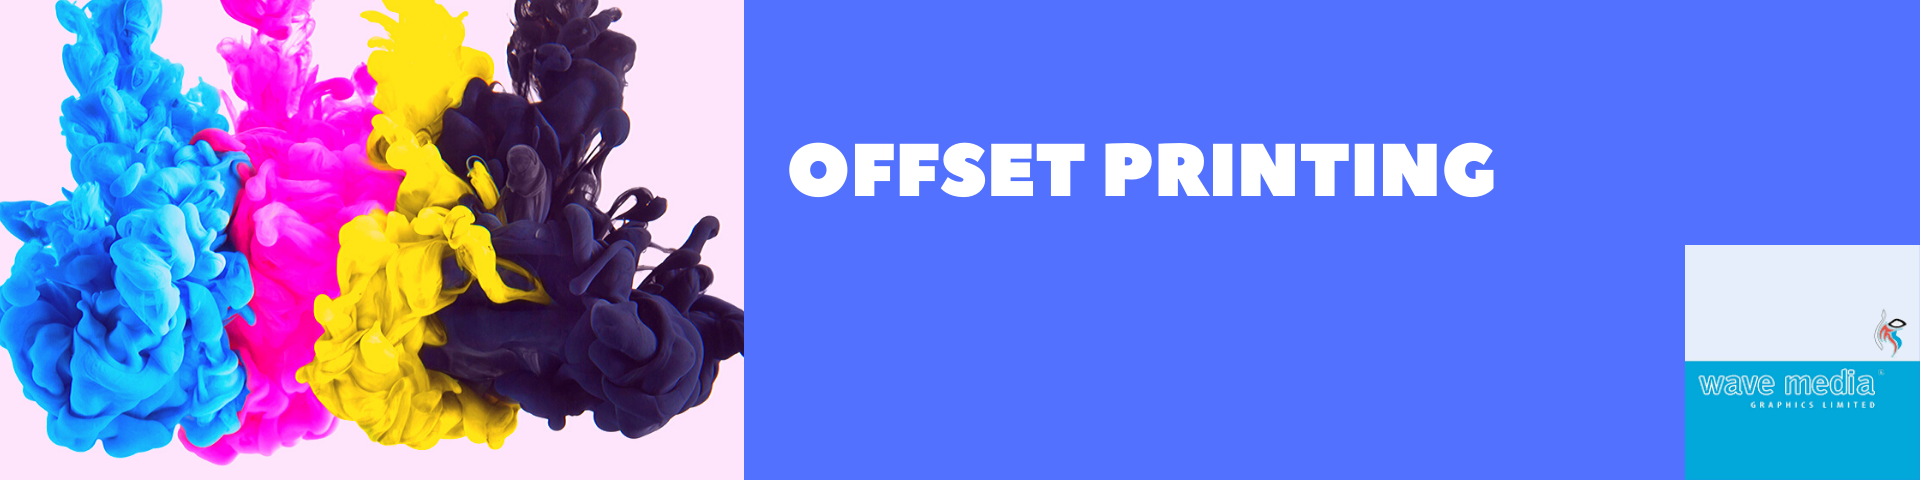 Offset Printing – What is it?